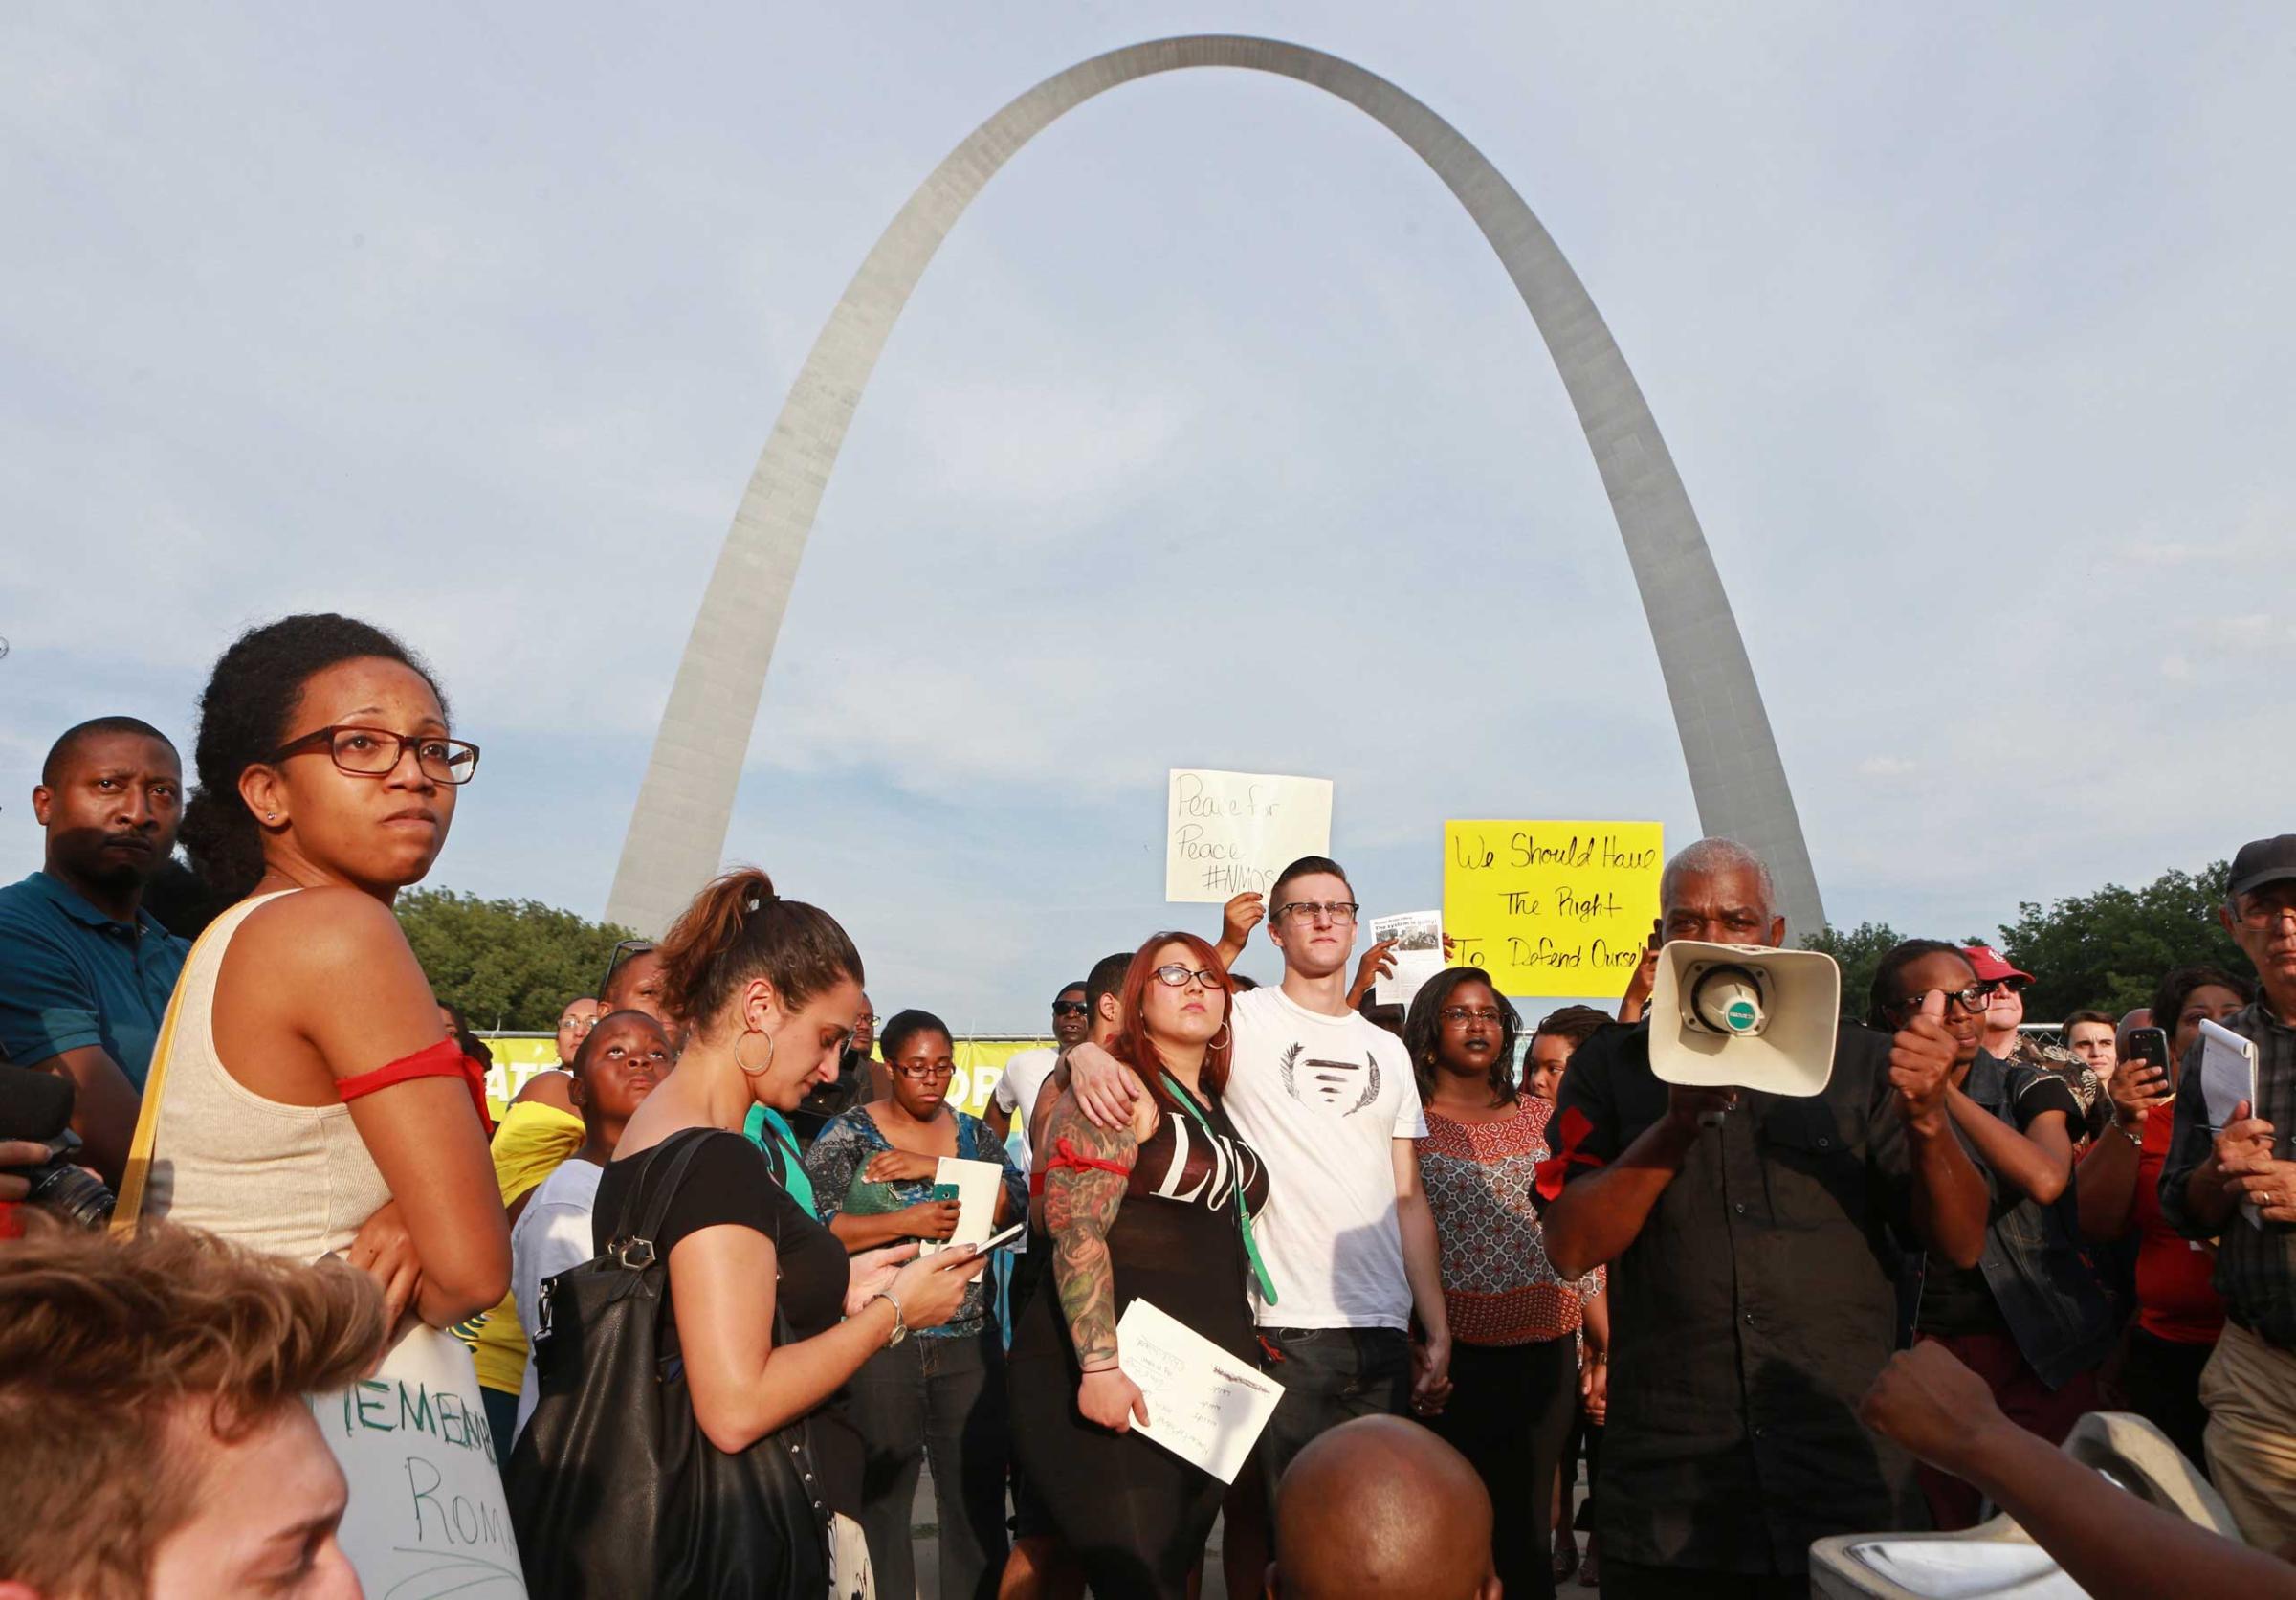 Aug. 14, 2014. A crowd of several hundred gatheres in a park near the Gateway Arch for a moment of silence on Thursday in St. Louis during a peace vigil and moment of silence for Michael Brown, an unarmed teenager who was shot and killed by Ferguson, Mo., police on Saturday.